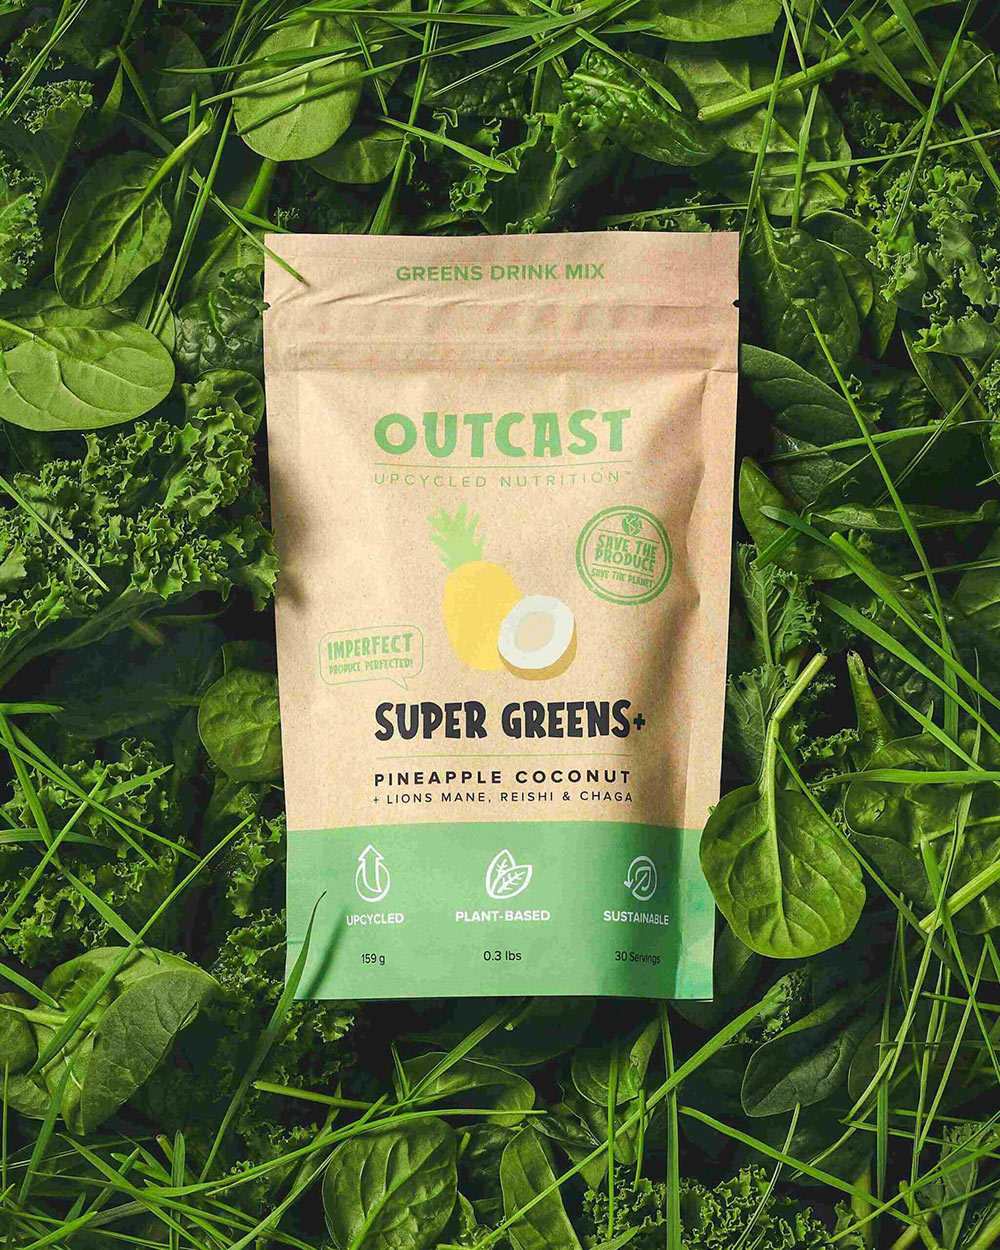 Package of Outcast green drink mix product called Super Greens with pineapple and coconut